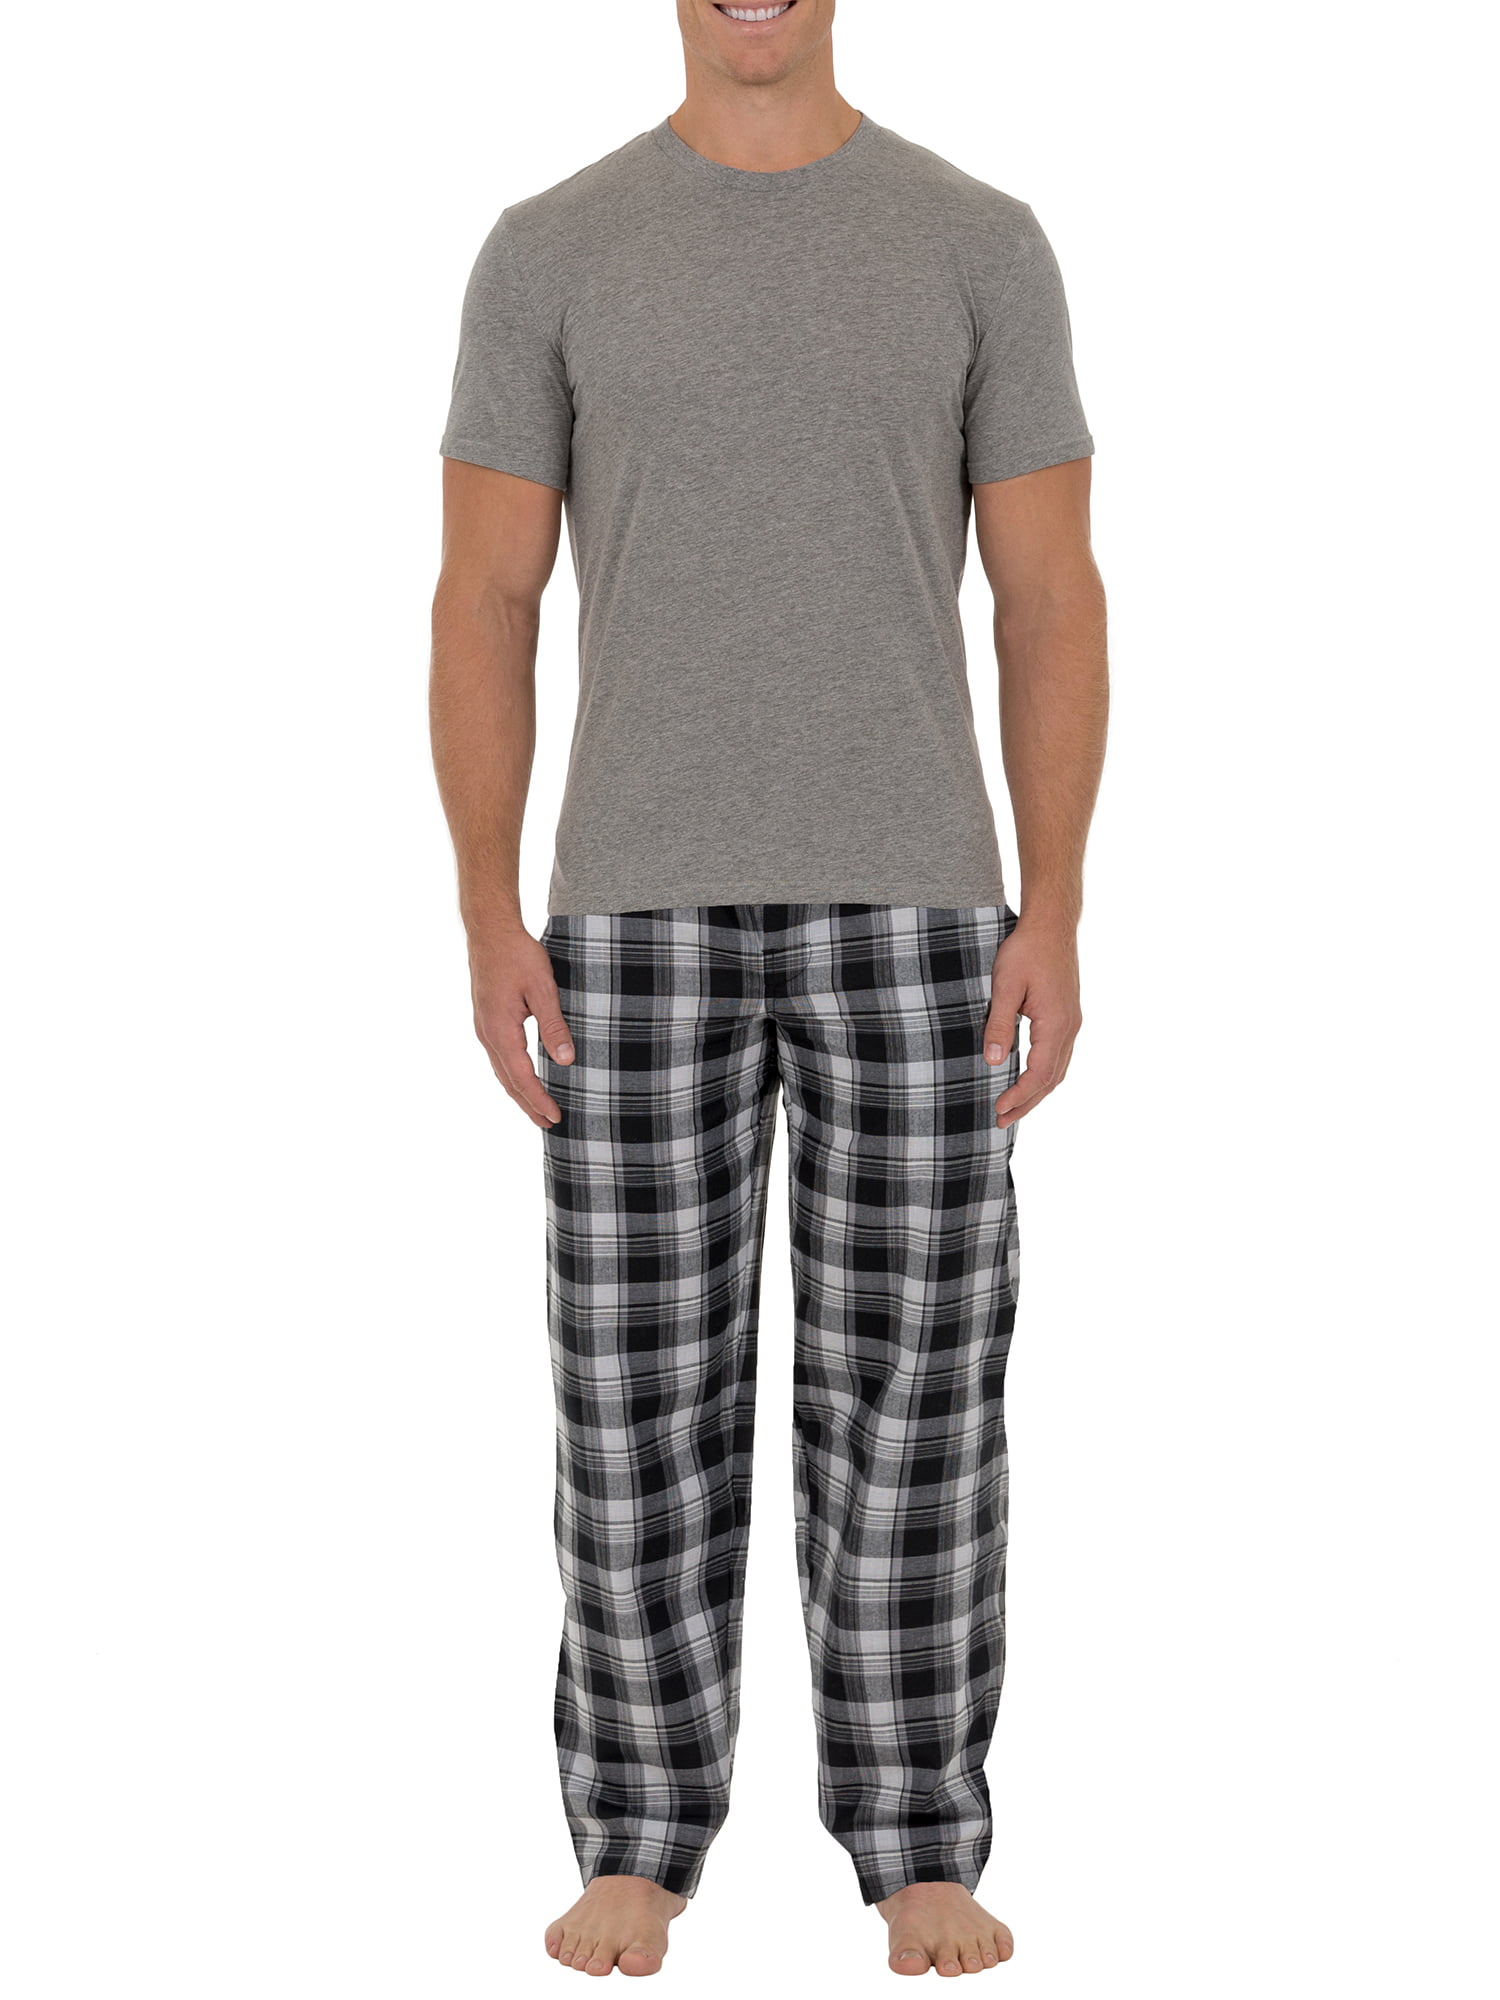 Fruit of the Loom Men's Microsanded Woven Sleep Pant with Jersey Top 2 ...